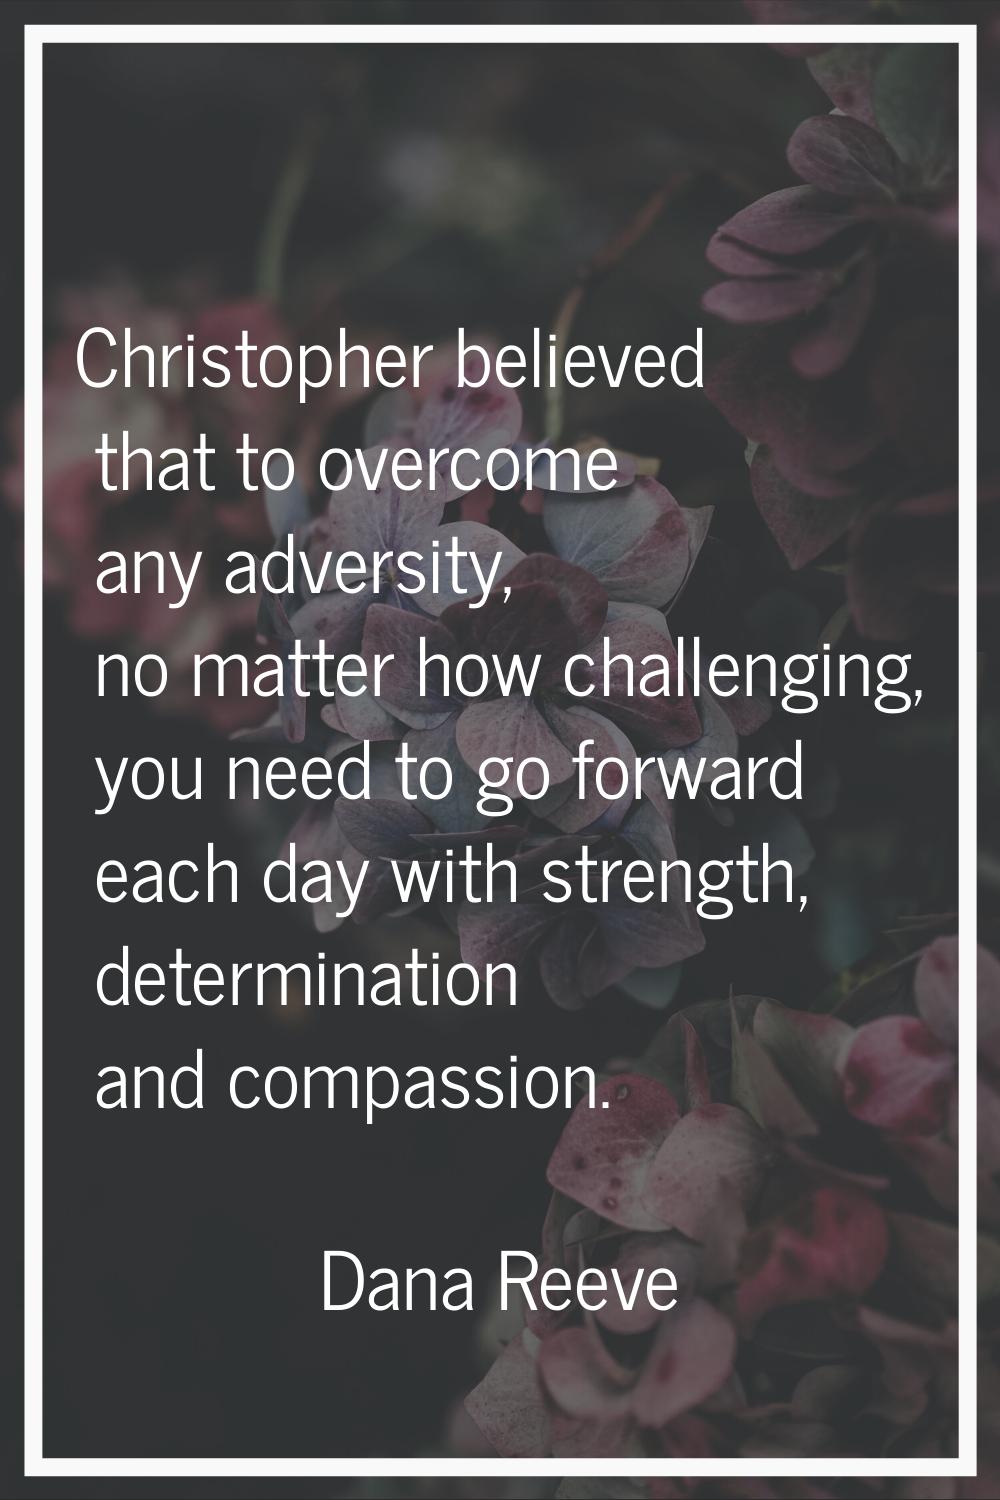 Christopher believed that to overcome any adversity, no matter how challenging, you need to go forw